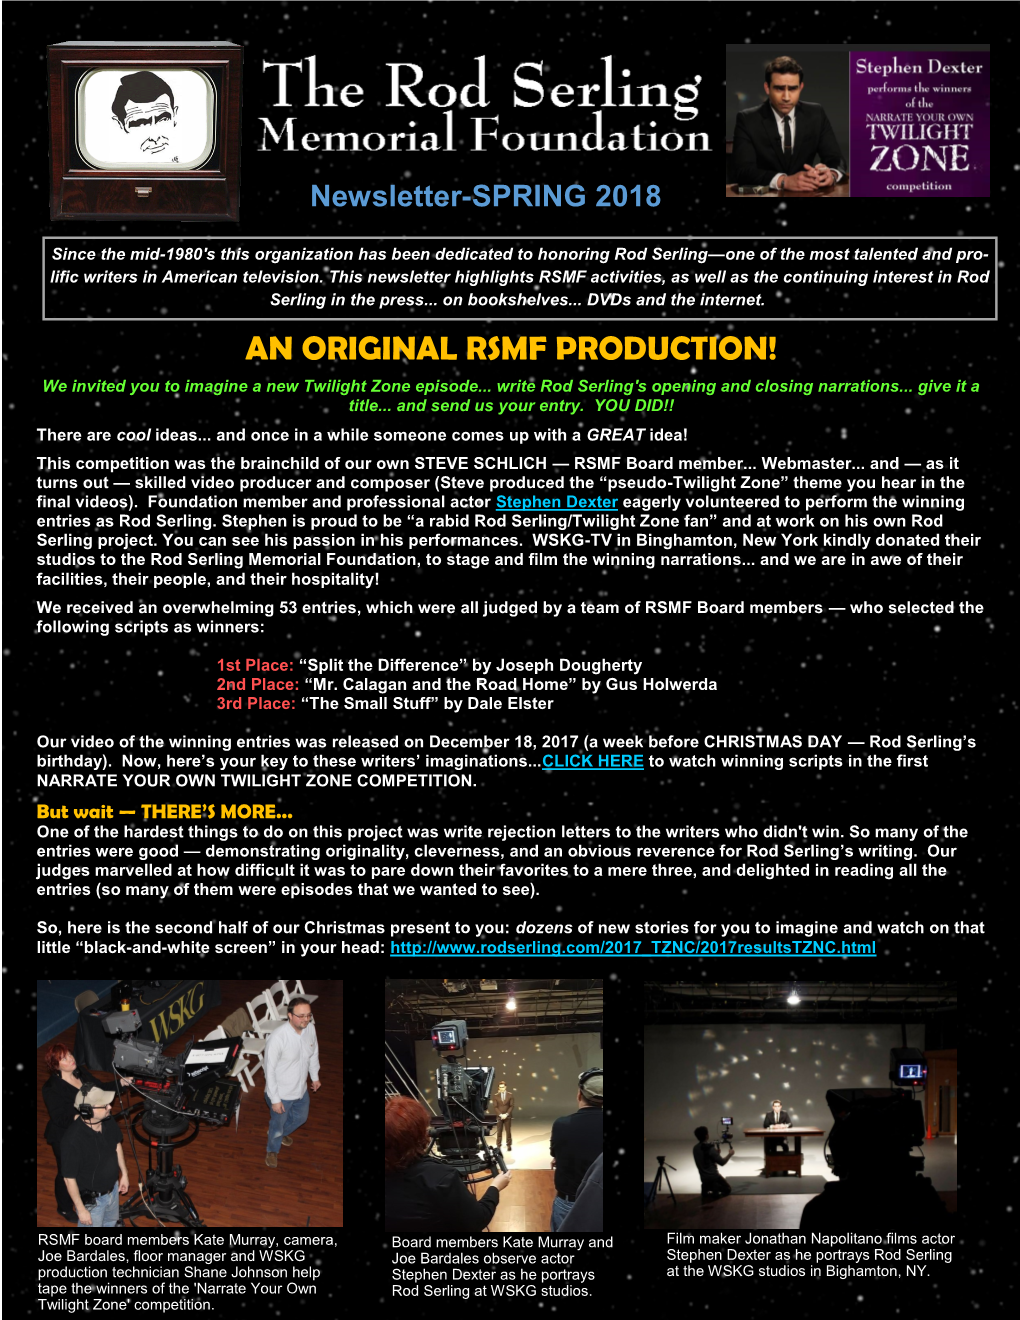 AN ORIGINAL RSMF PRODUCTION! We Invited You to Imagine a New Twilight Zone Episode